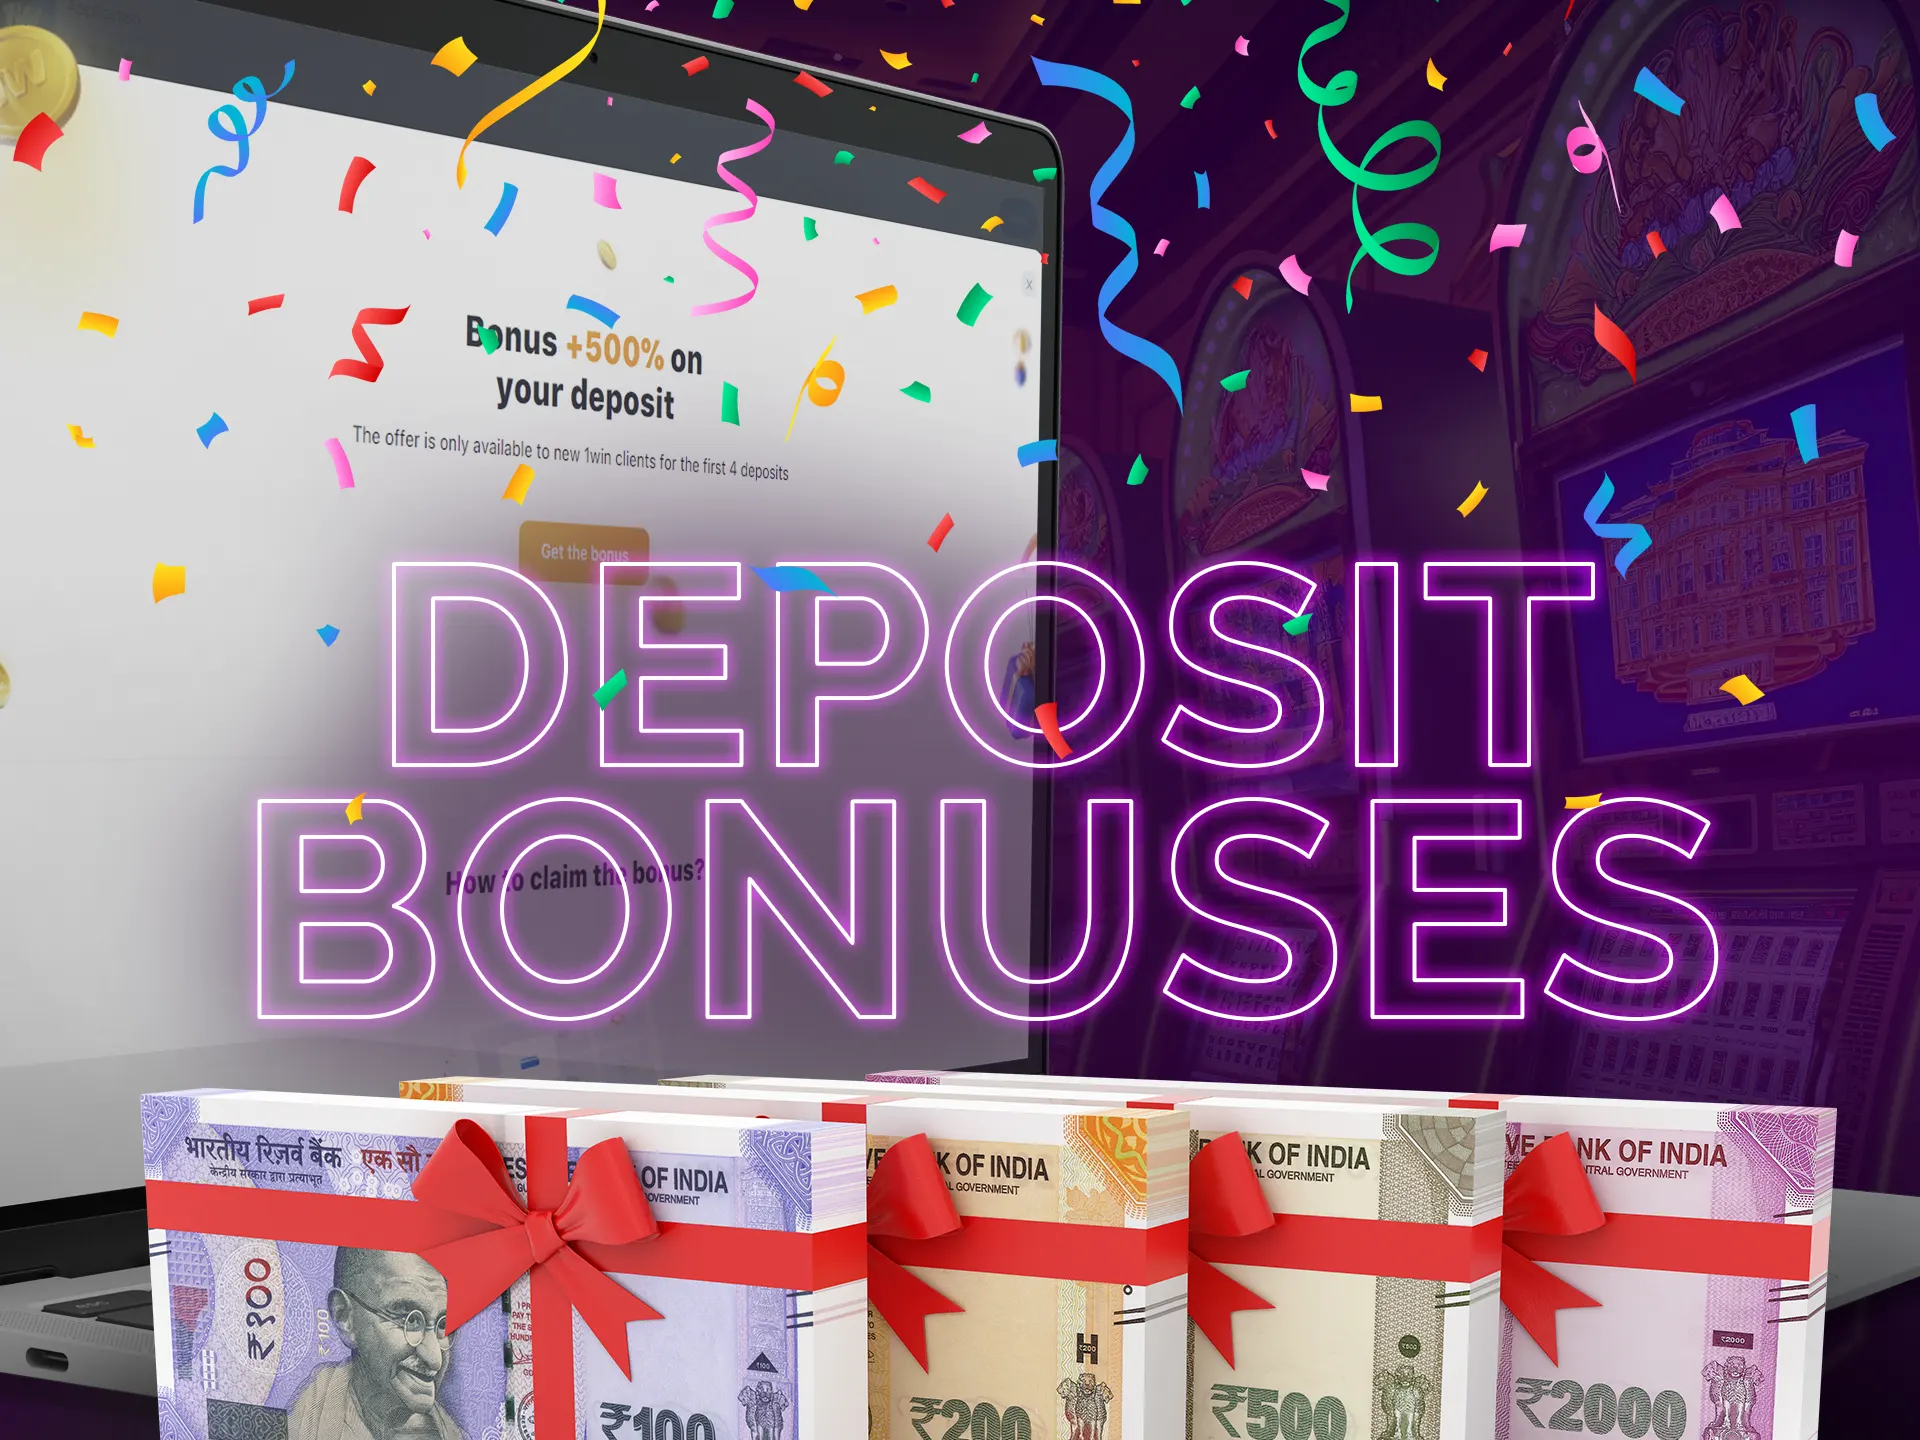 Deposit bonuses boost player bankrolls, extending gameplay and enhancing winning opportunities, especially for frequent depositors.